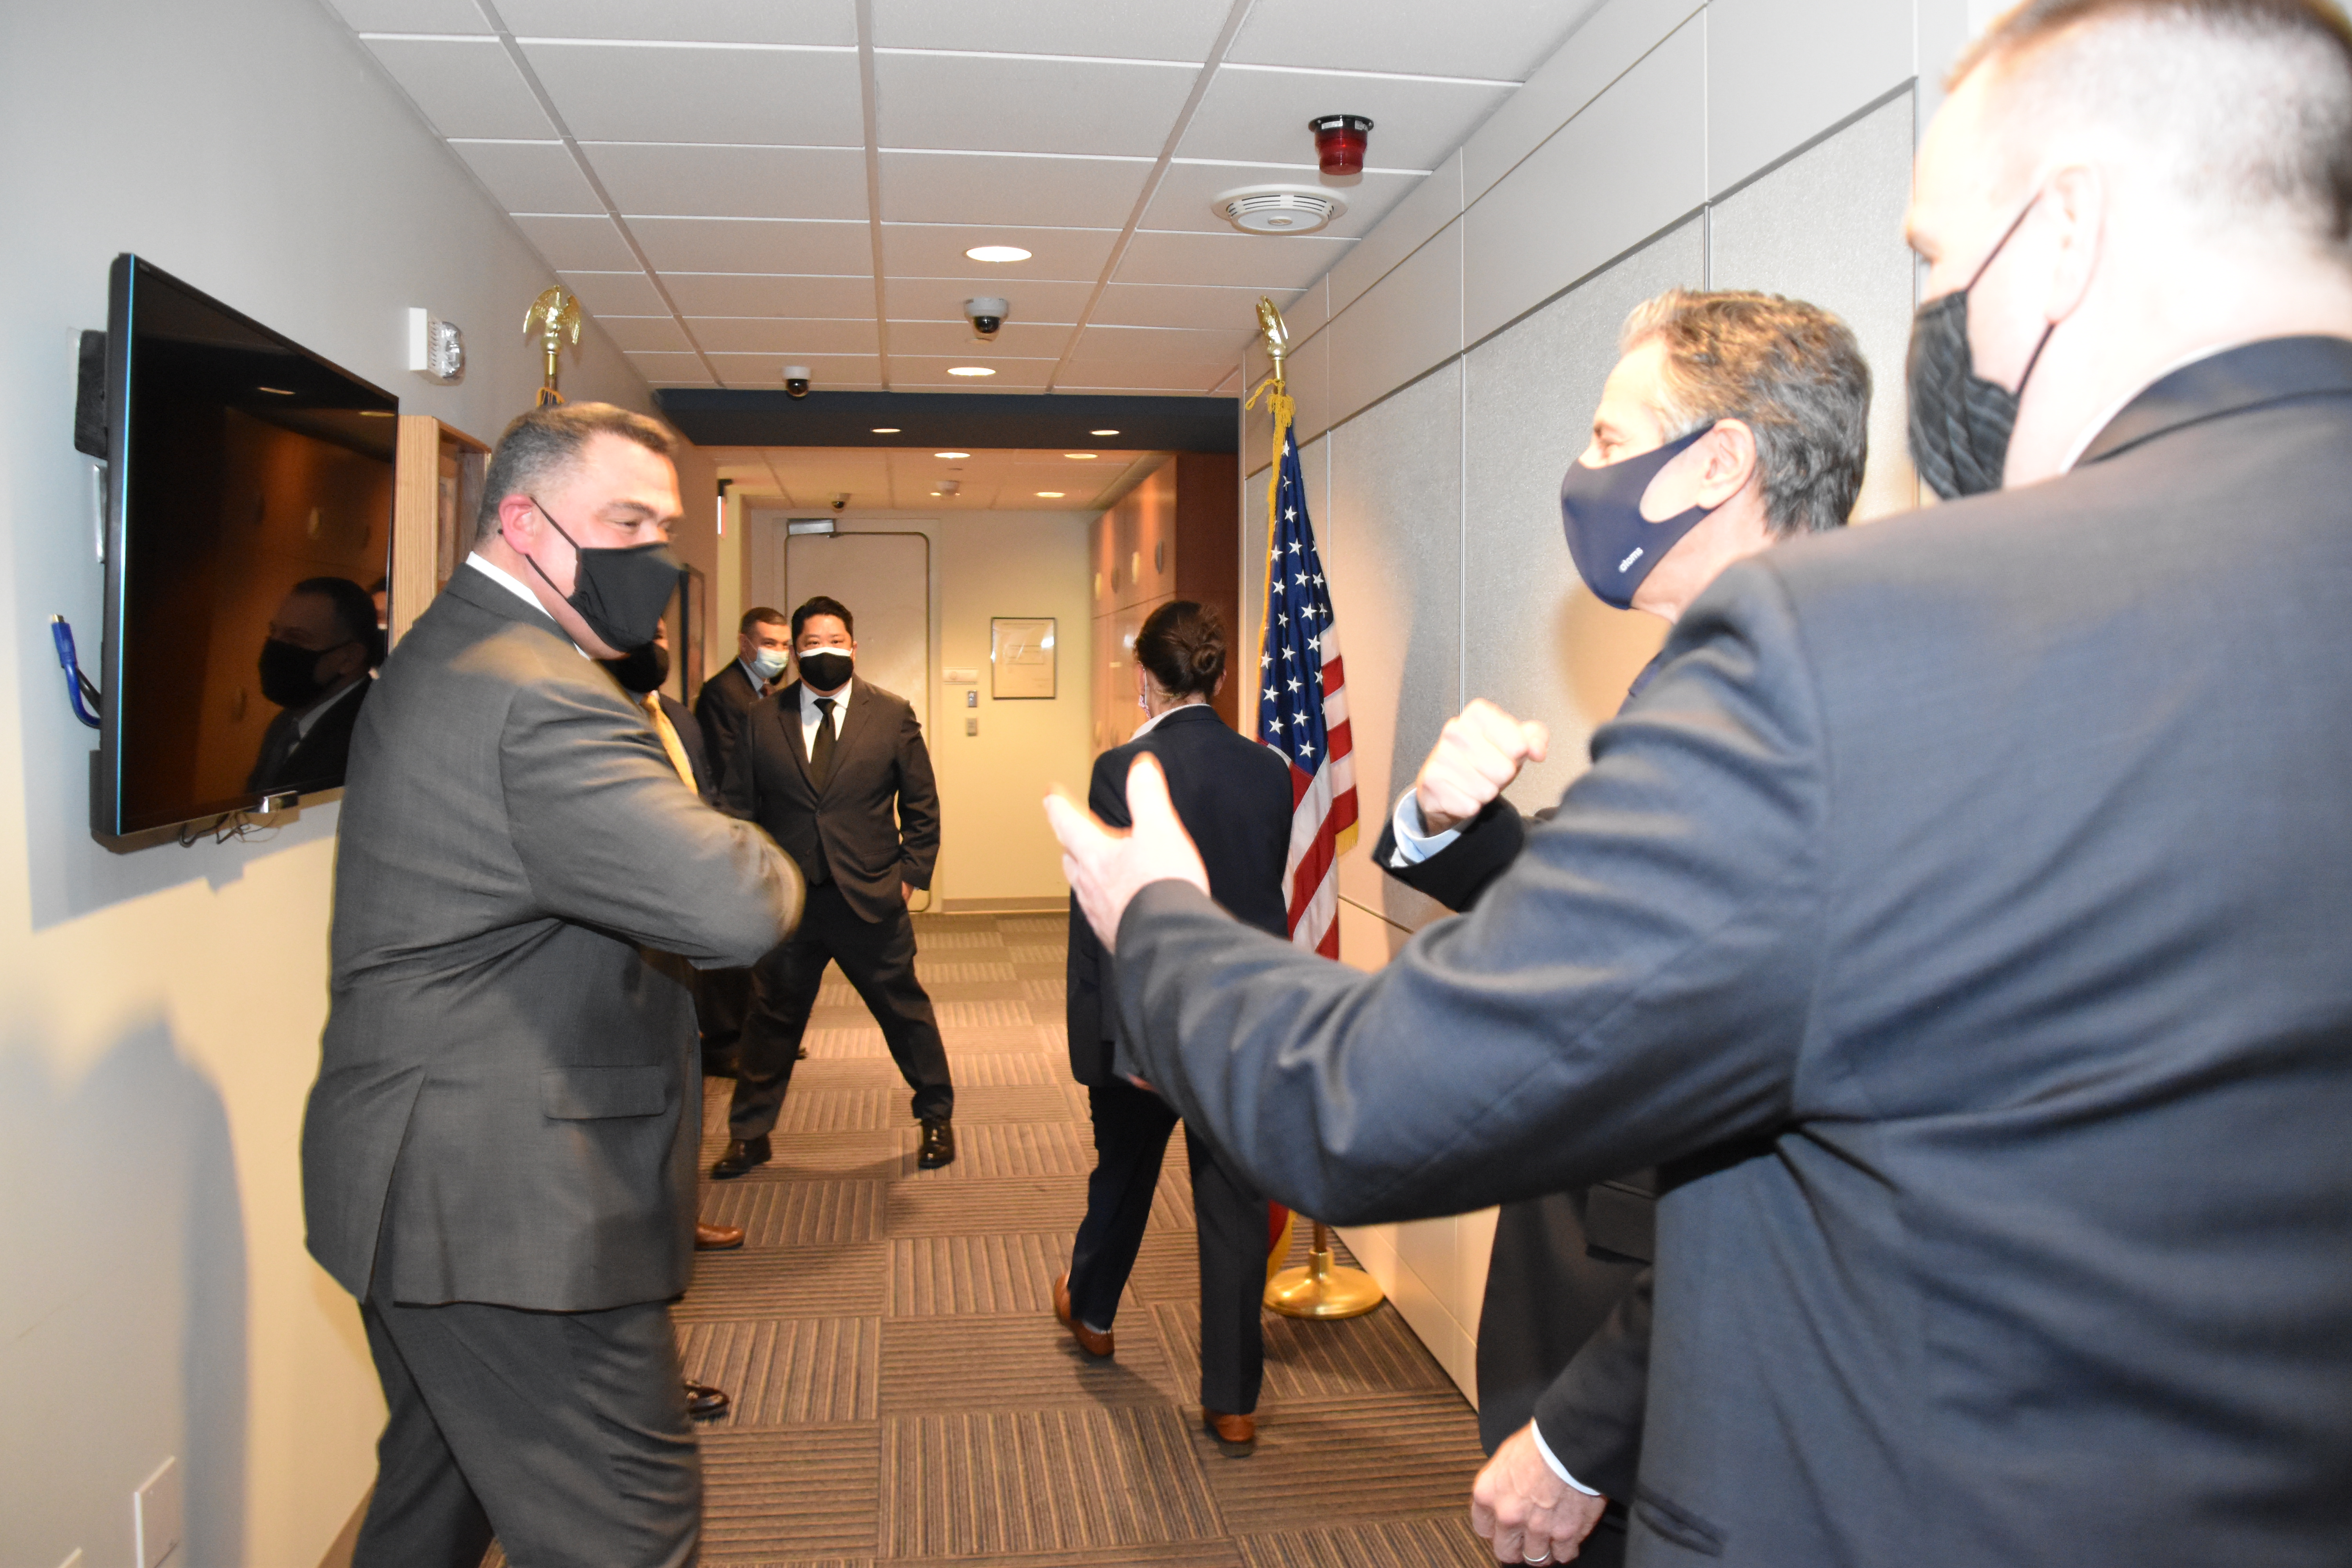 Acting Assistant Secretary of State for the Bureau of Diplomatic Security Todd J. Brown (far right) introduces Secretary of State Antony J. Blinken (second from right) to Acting Director of the Diplomatic Security Service Carlos F. Matus (front, far left), who welcomes Secretary Blinken to the DSSCC with an elbow bump, Arlington, Va., February 21, 2021. (U.S. Department of State photo)